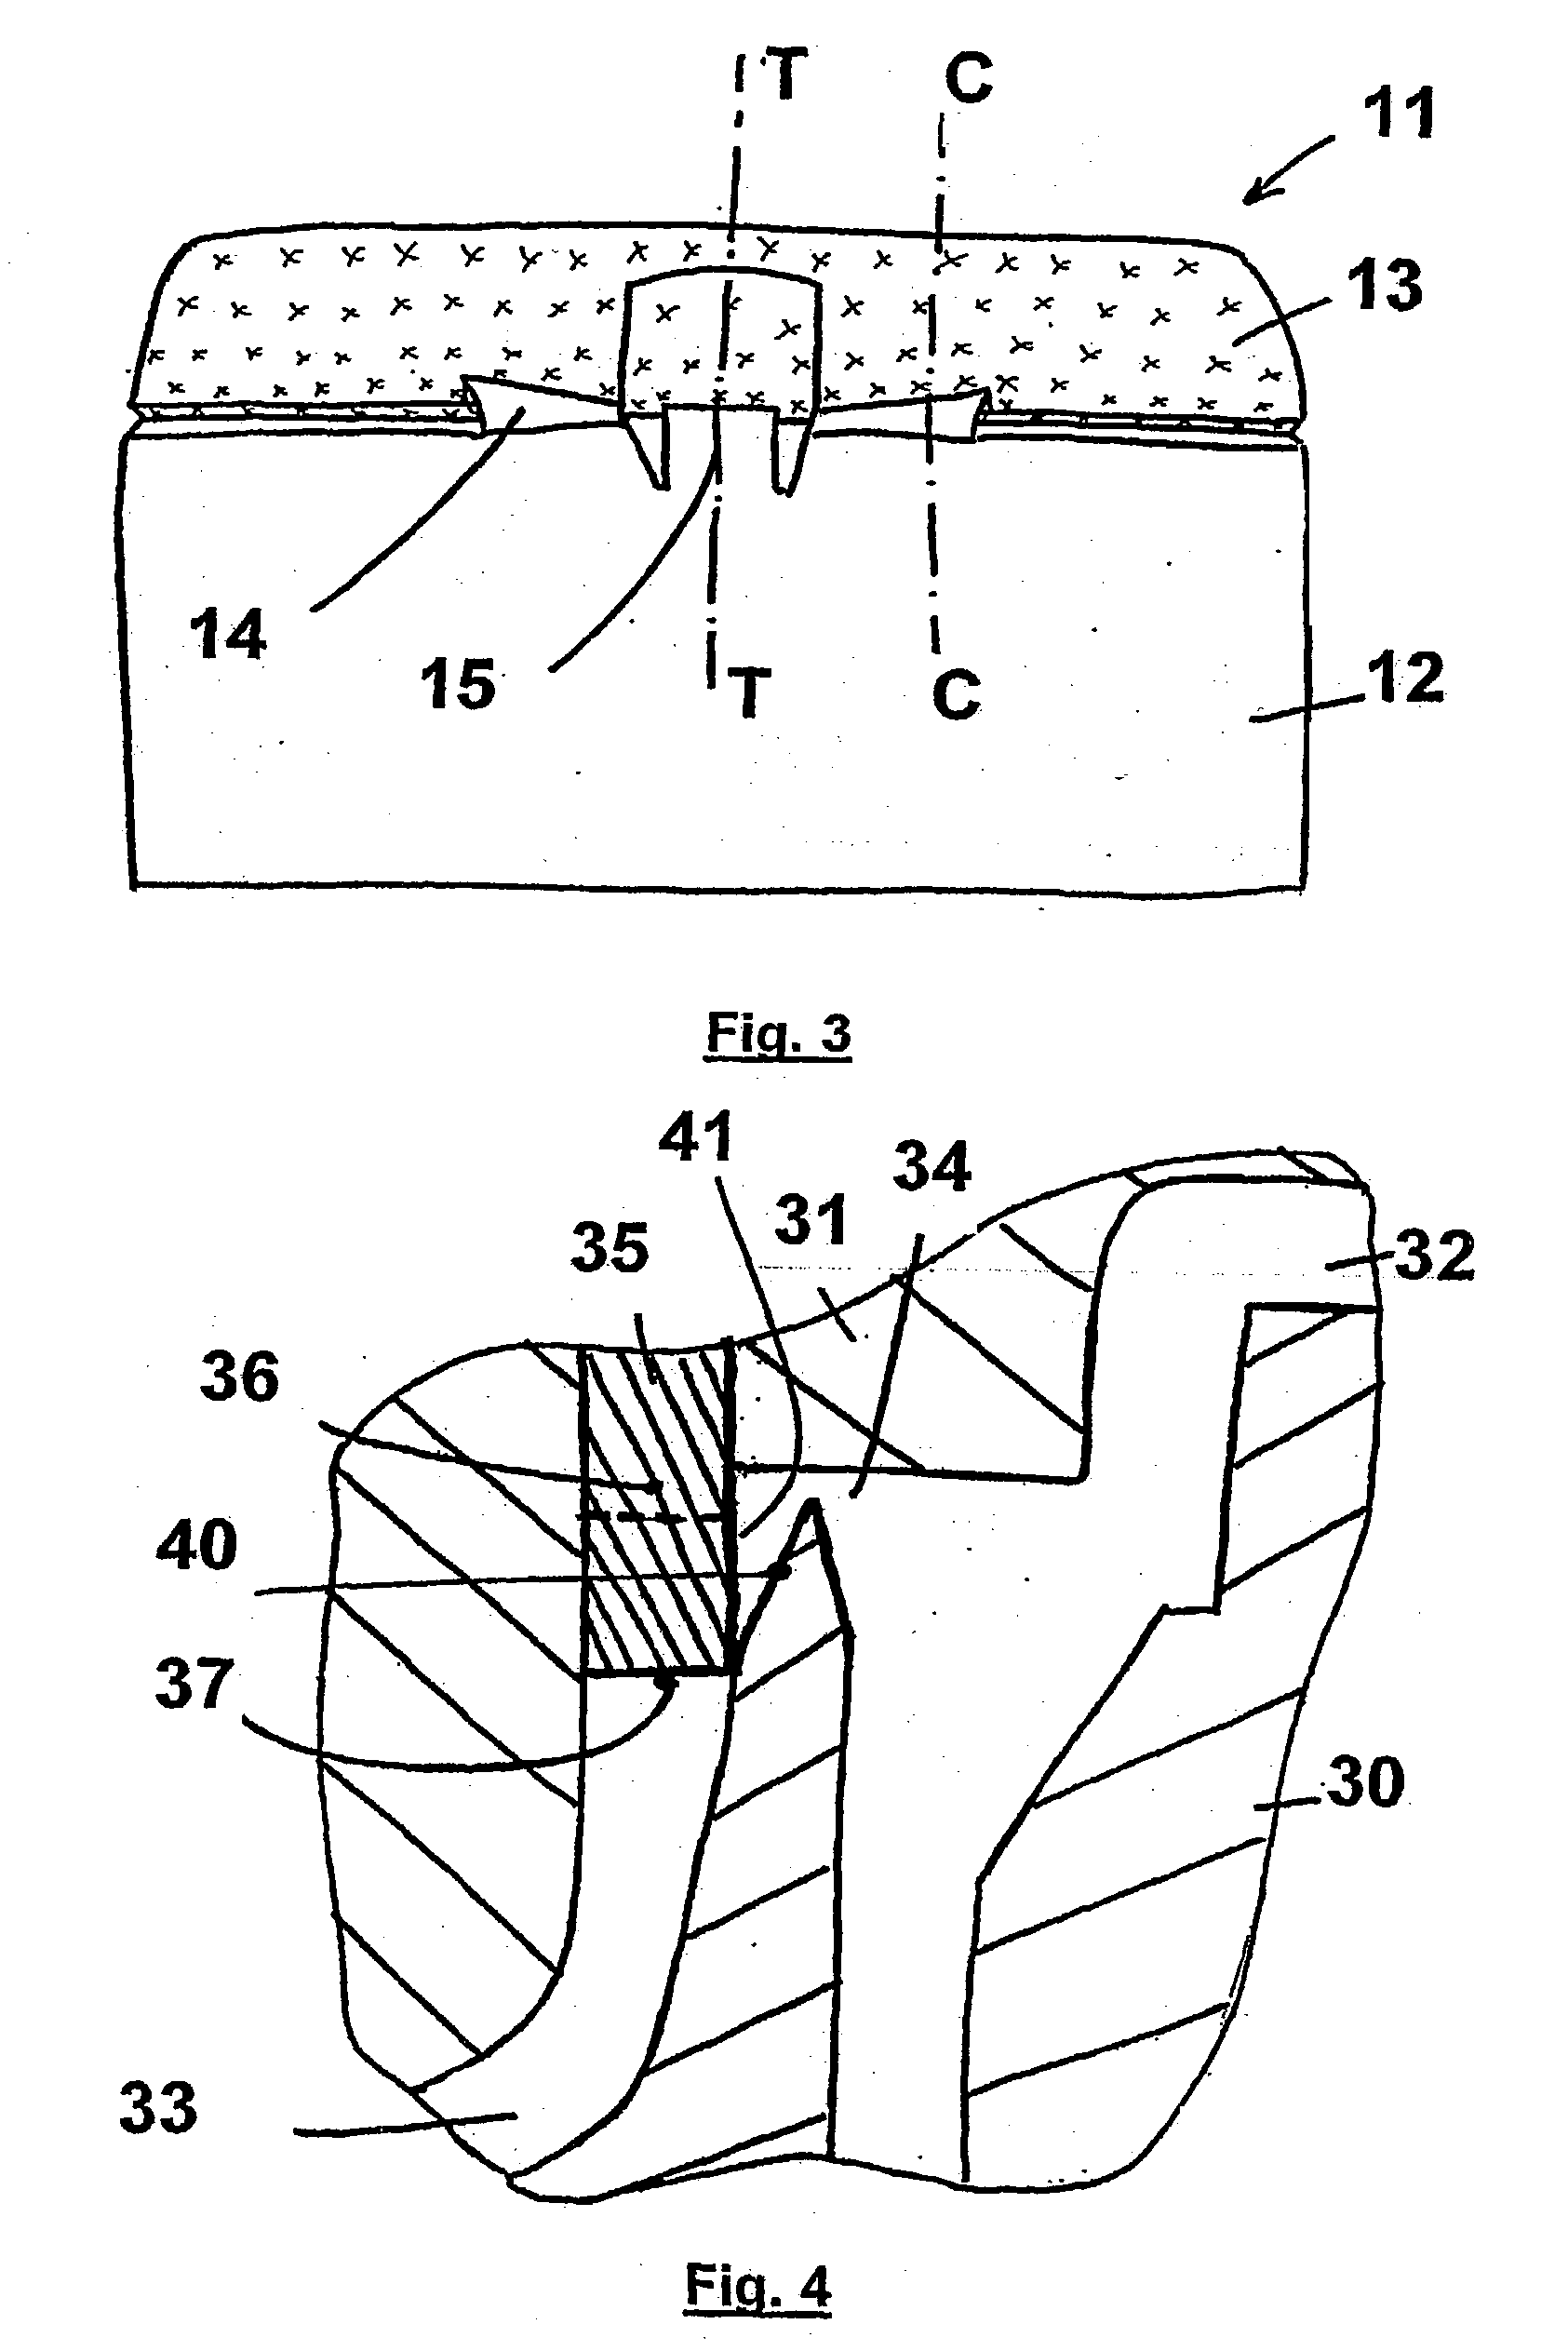 Multicolour and multiple material injection moulding of a capsule provided with a cap pivoting about a hinge